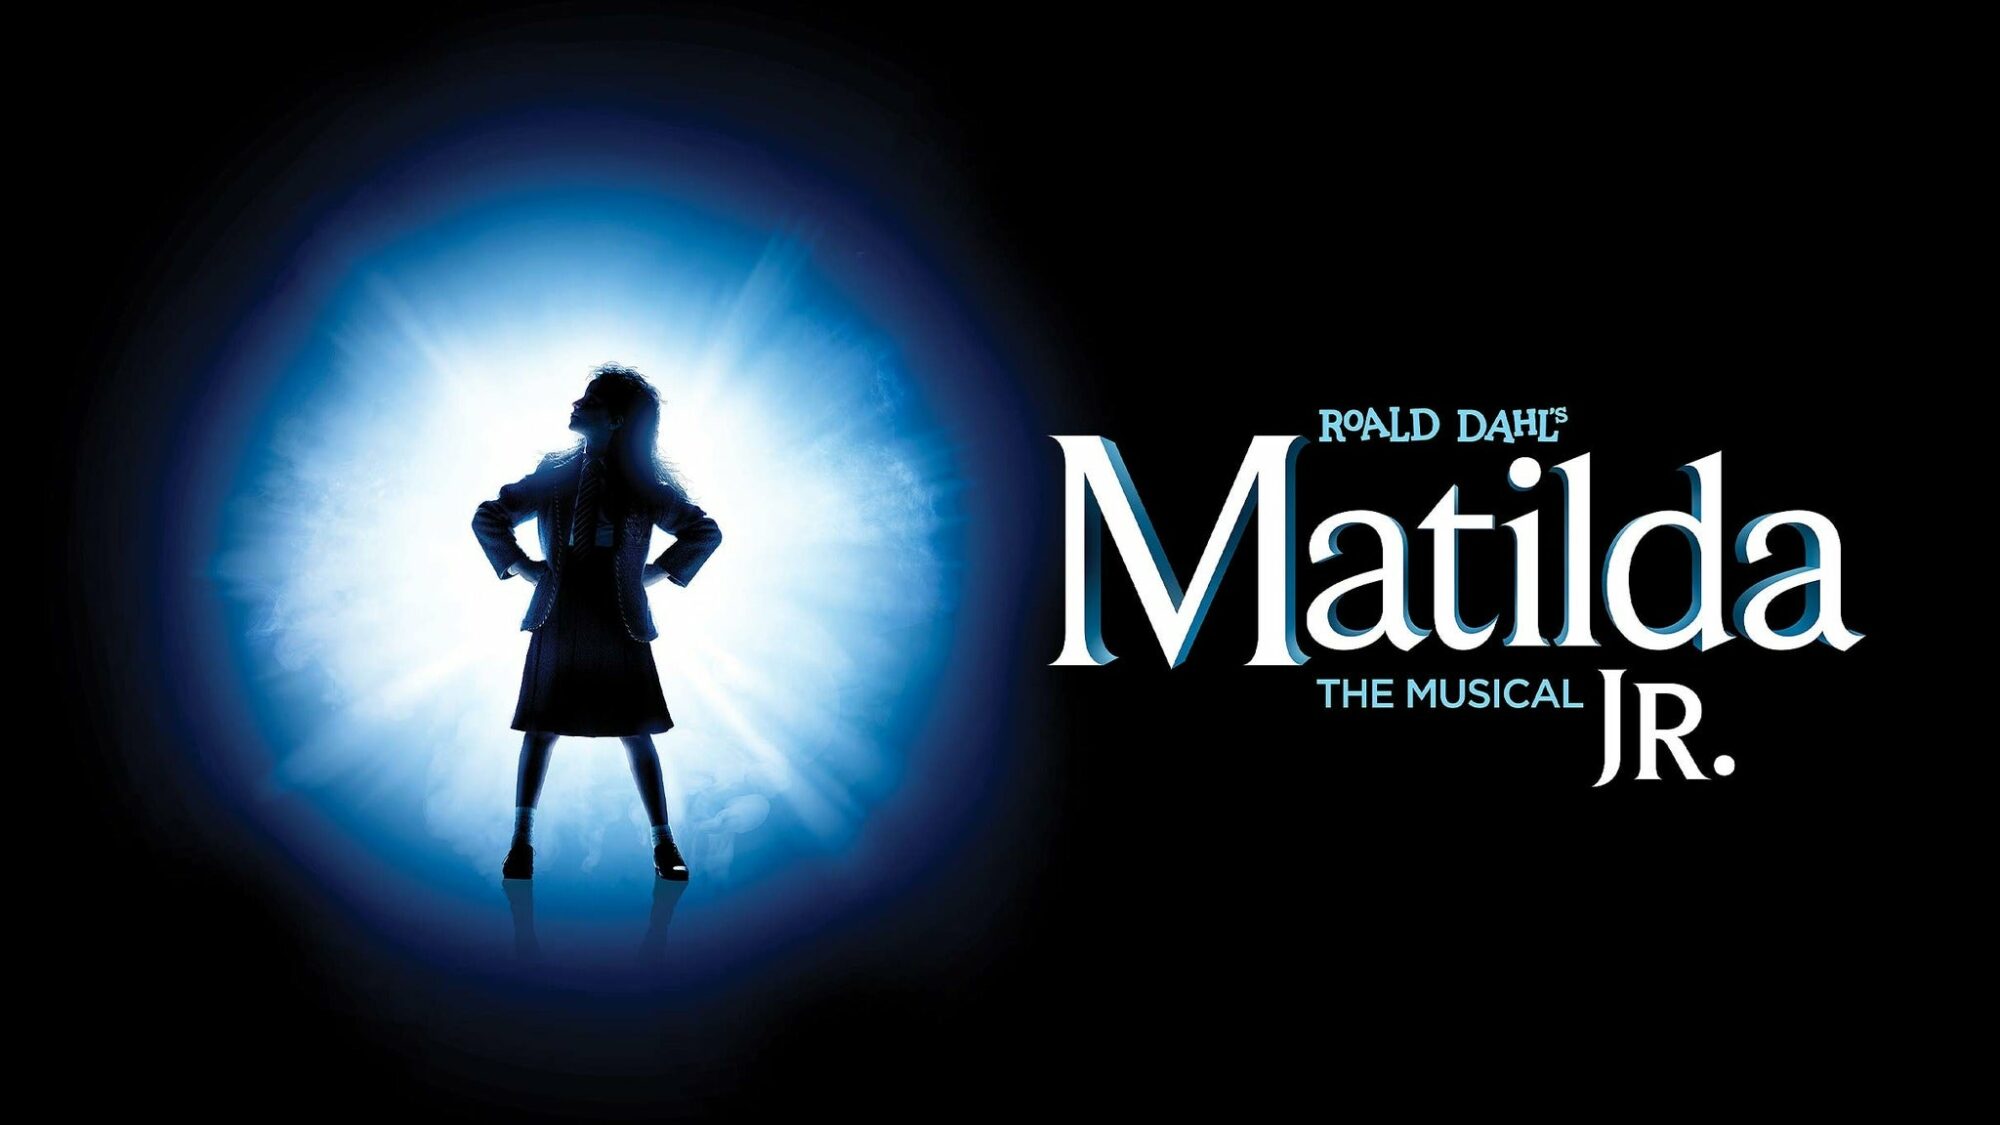 Image name Matilda Jr The Musical at Whitby Pavilion Theatre Whitby the 21 image from the post Events in Yorkshire.com.